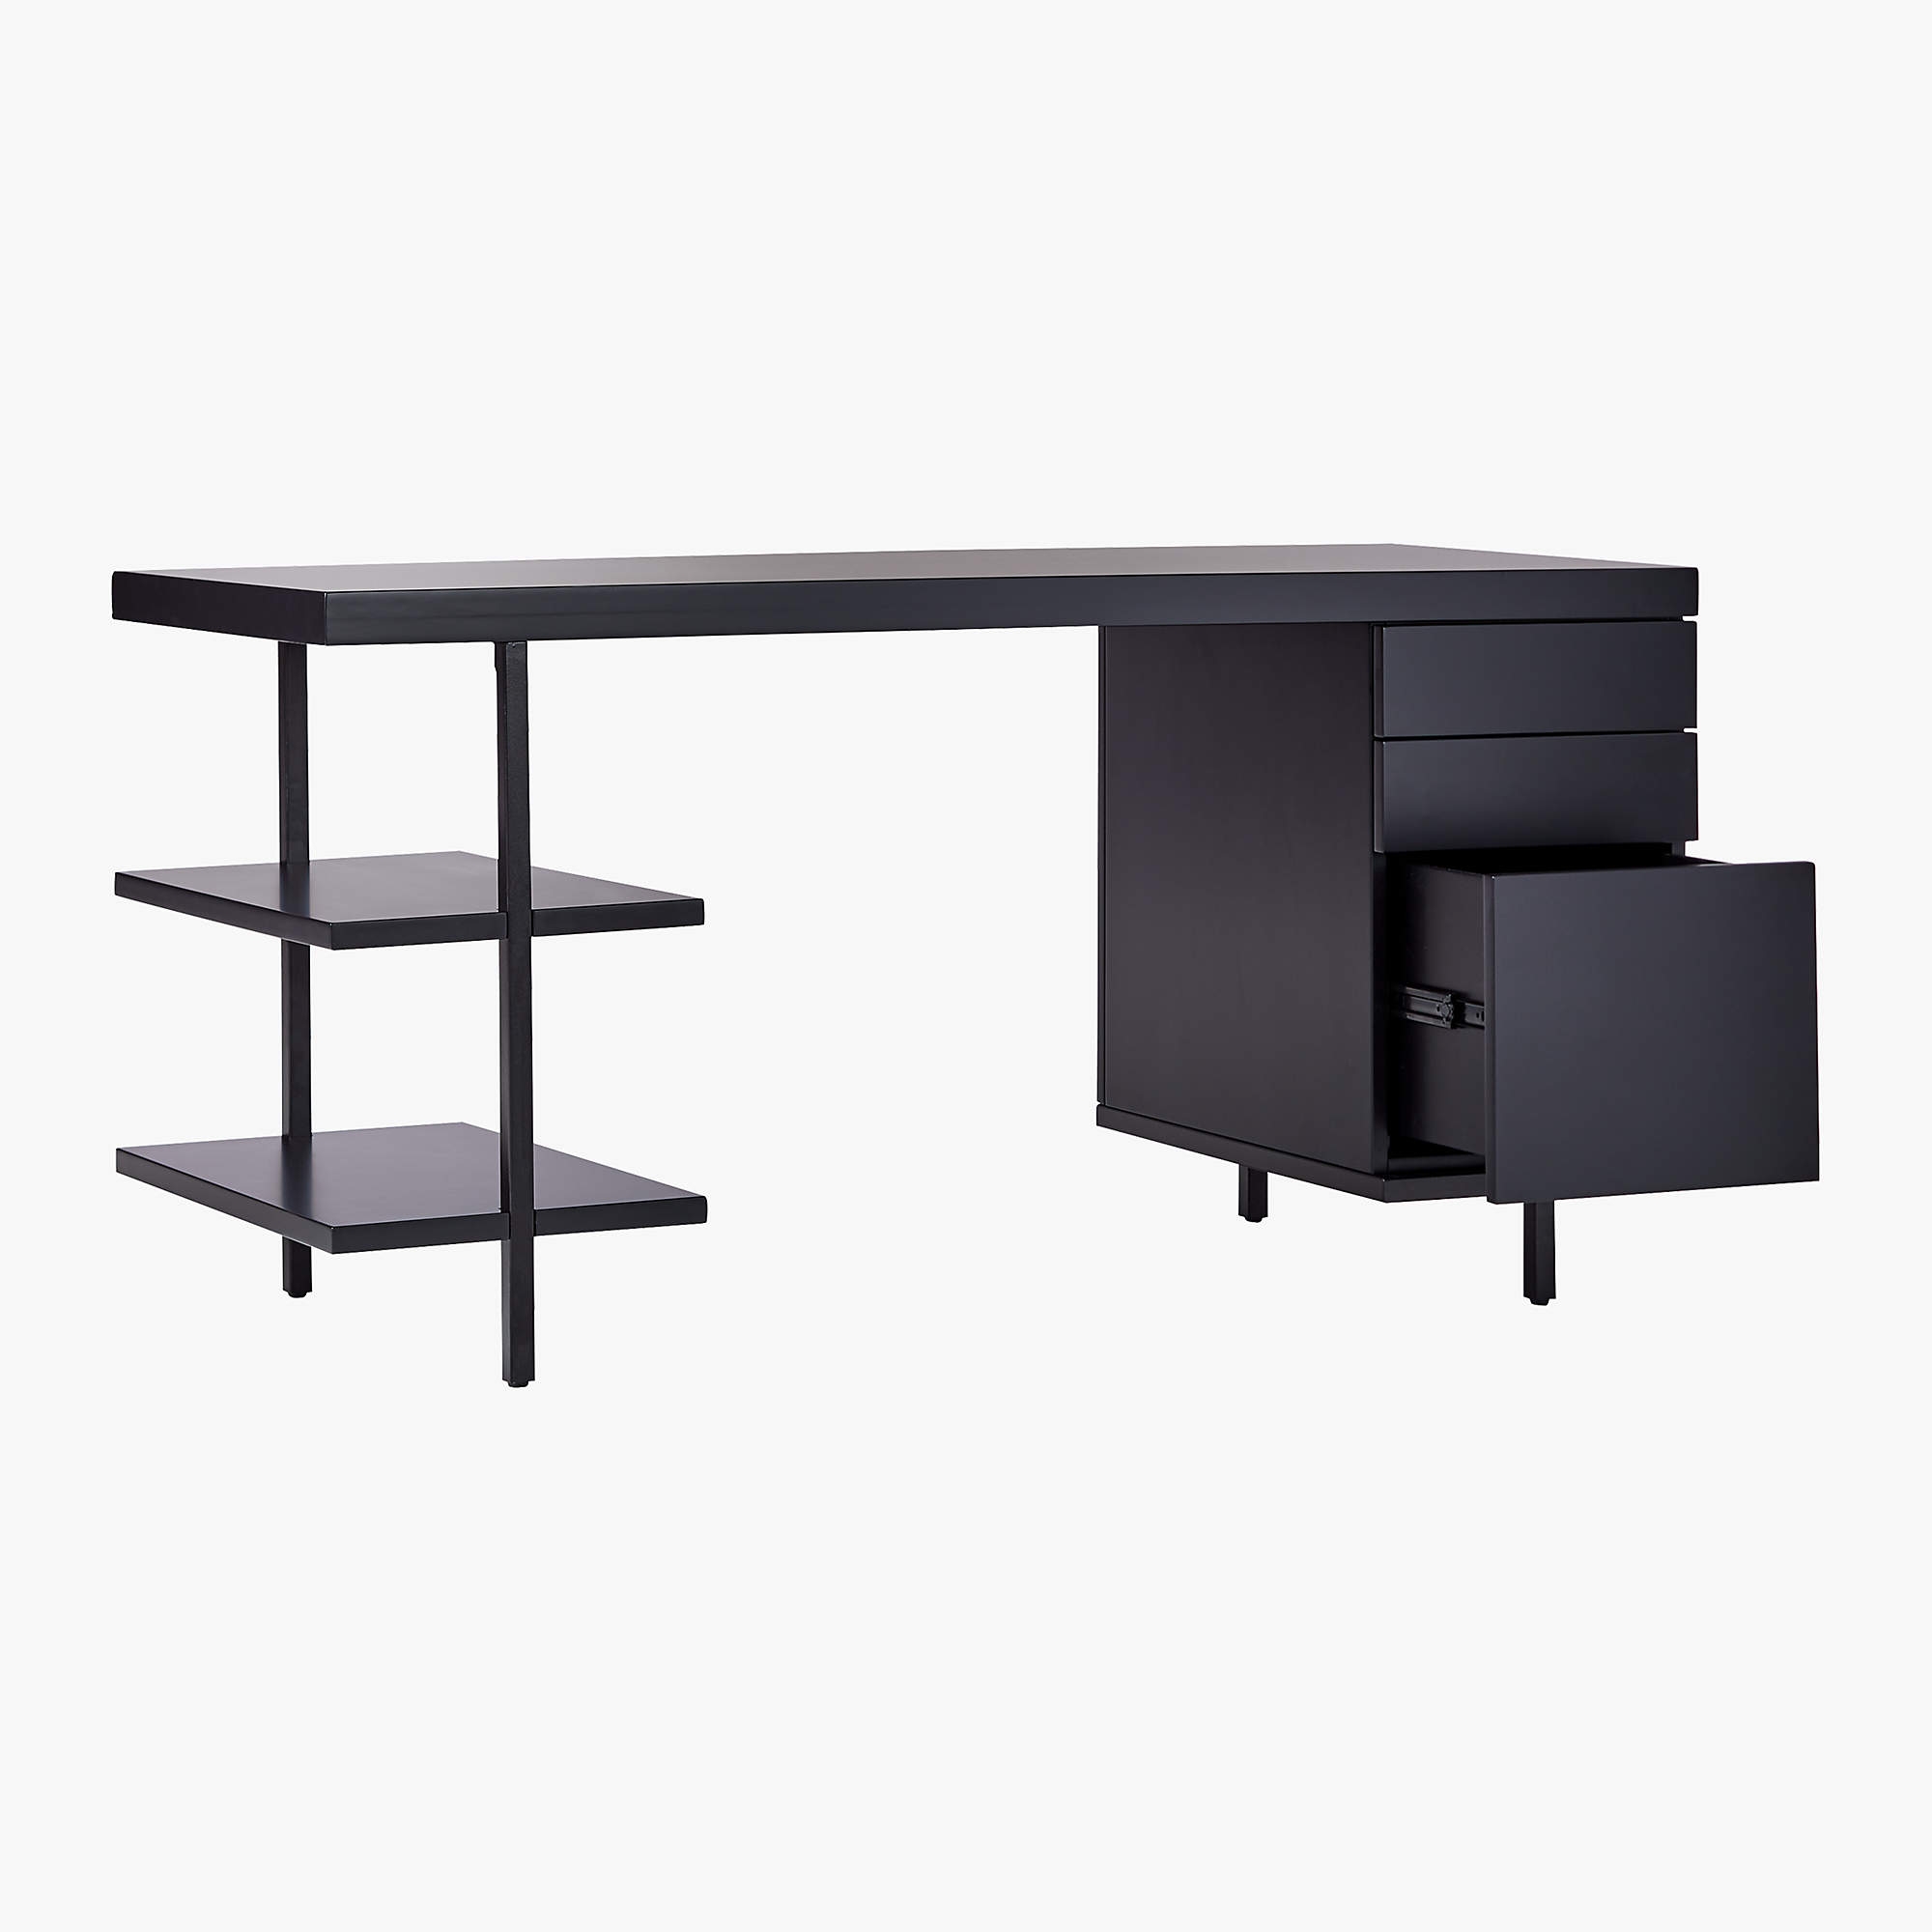 Stairway 3-Drawer Black Wood Desk with Shelves - Image 1